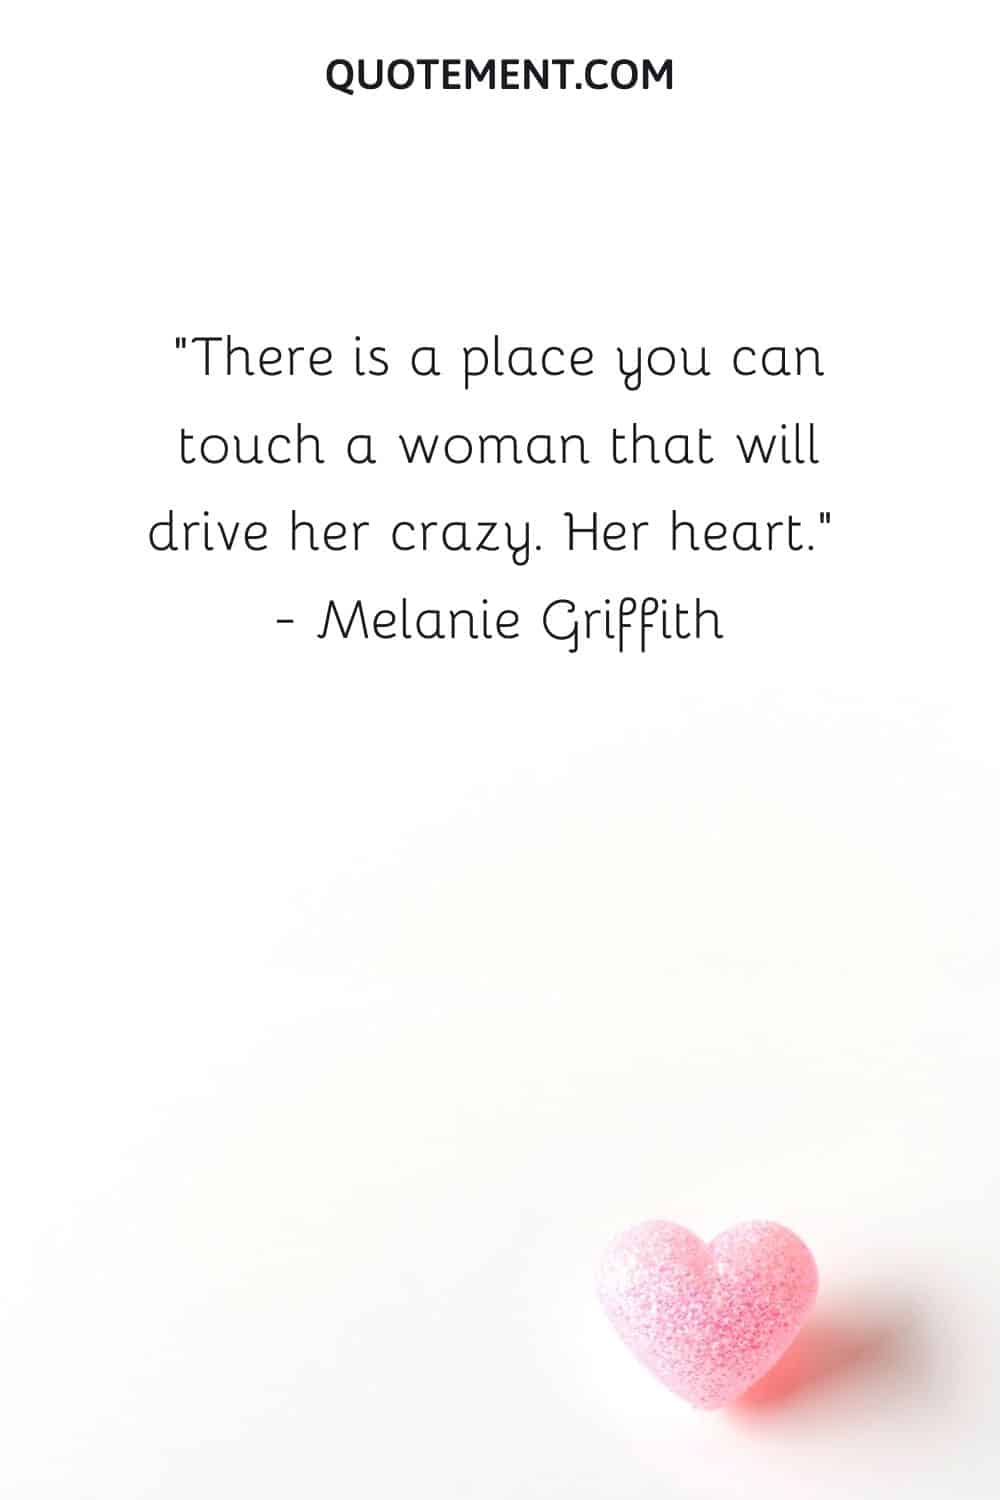 There is a place you can touch a woman that will drive her crazy.